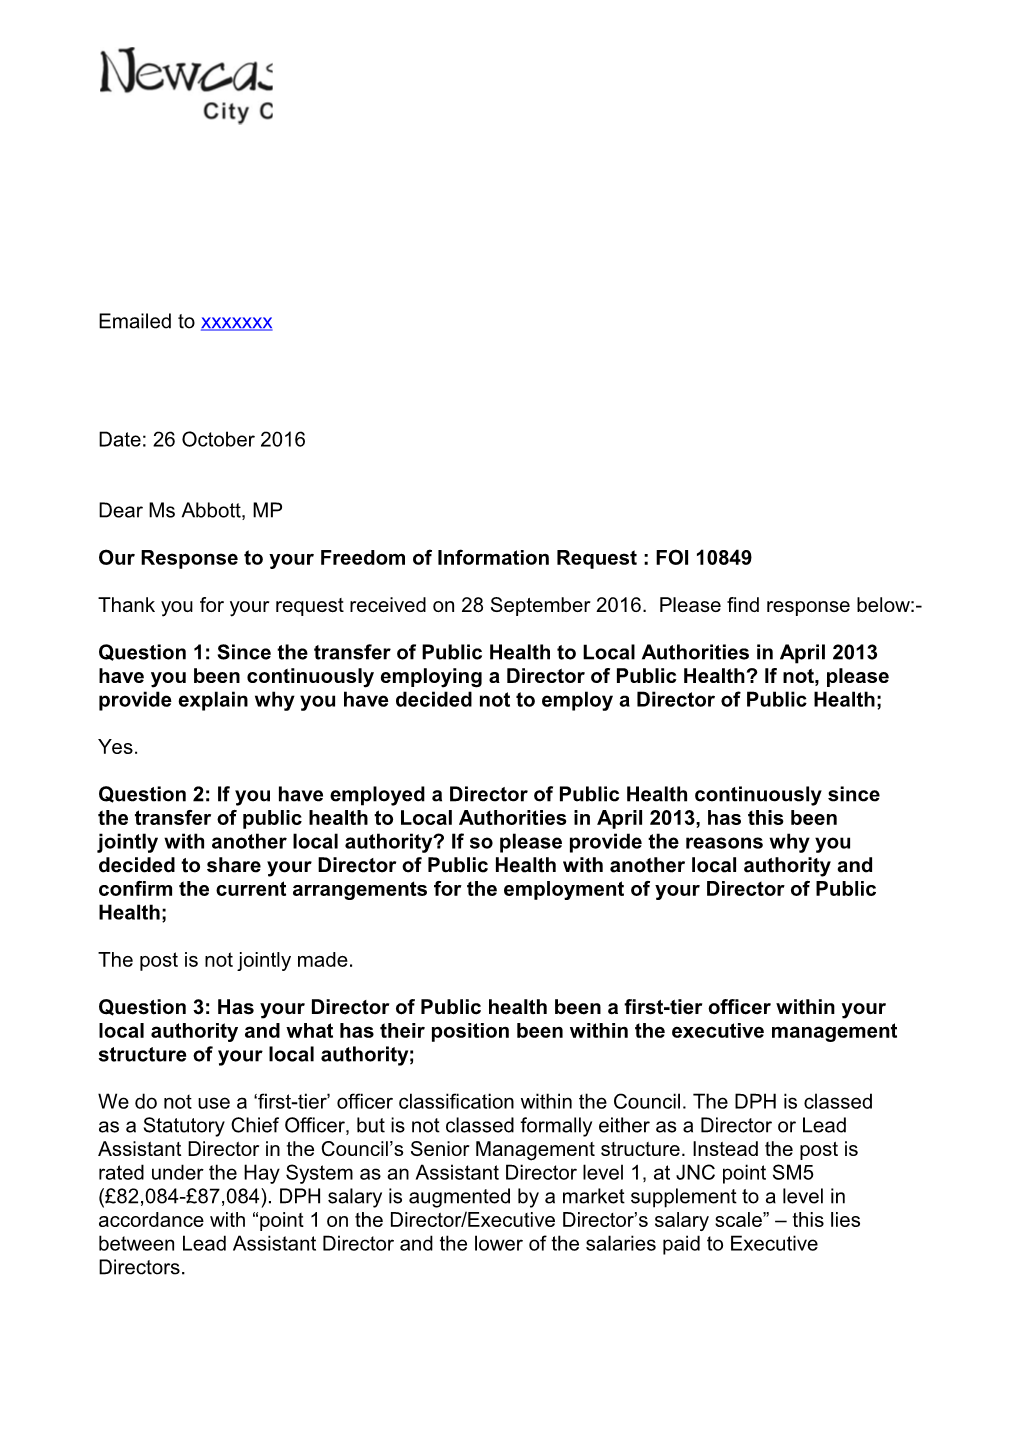 Our Response to Your Freedom of Information Request : FOI 10849